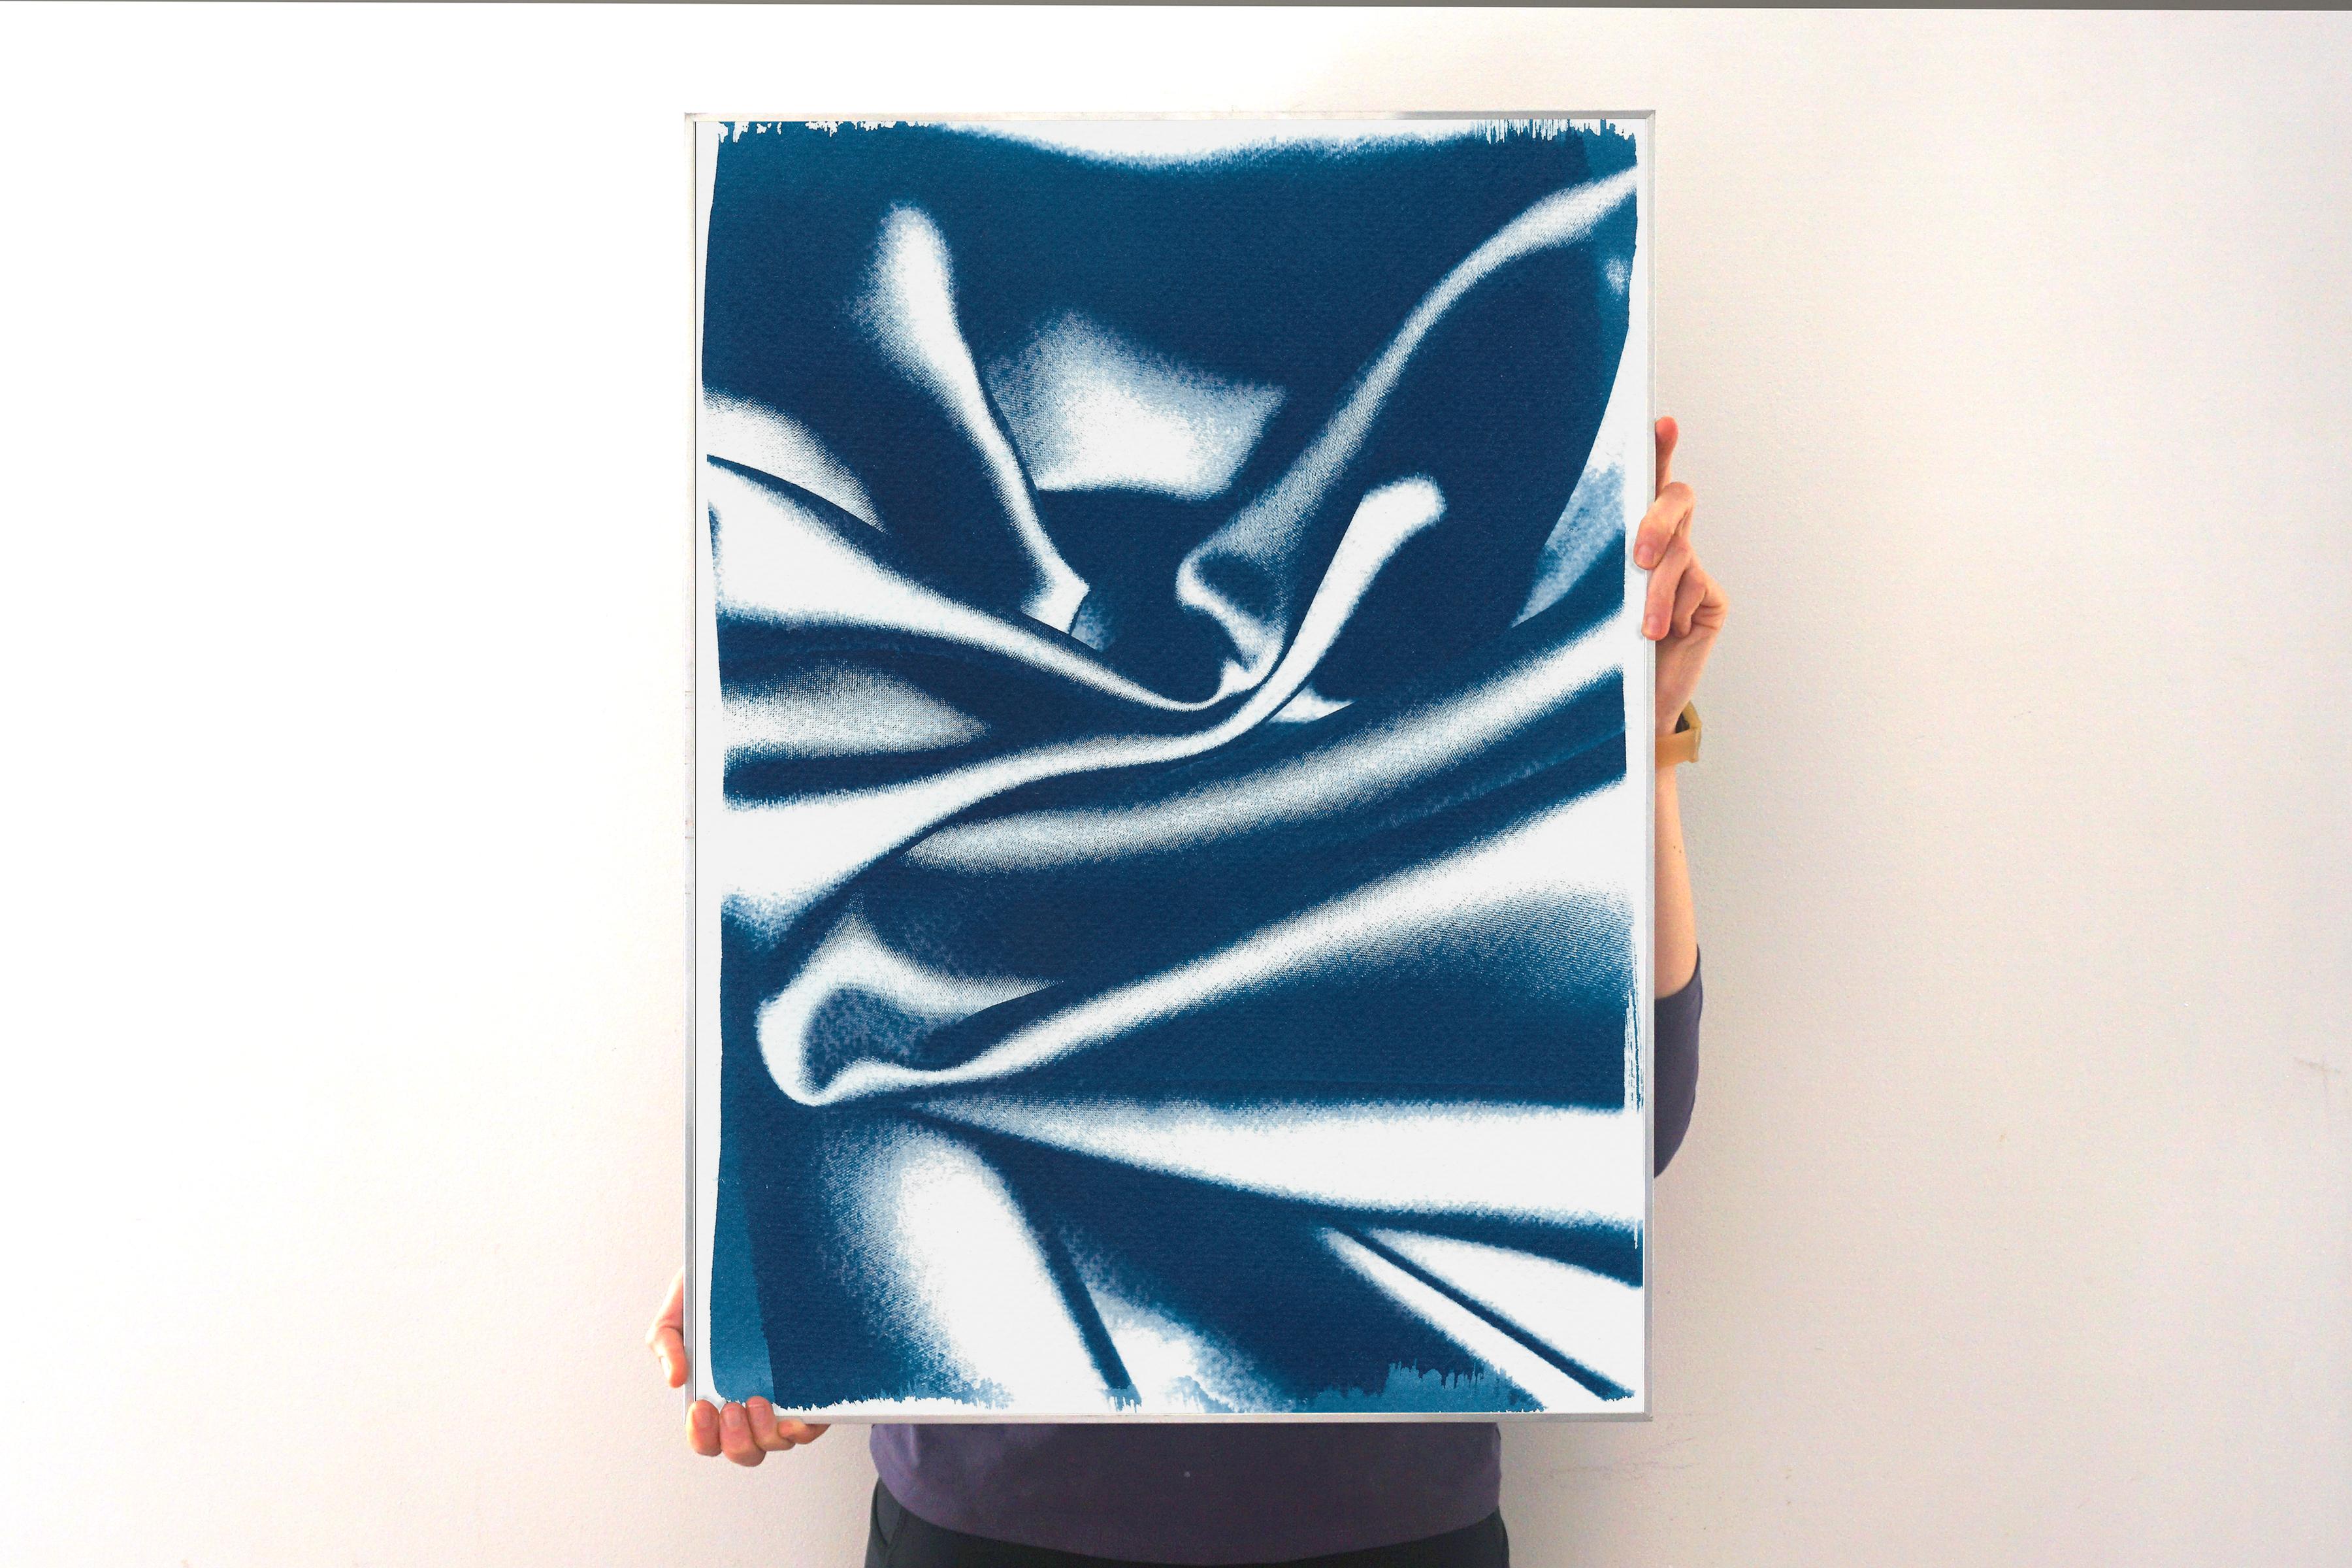 This is an exclusive handprinted limited edition cyanotype.

Details:
+ Title: Classic Blue Silk Movement nº2
+ Year: 2019
+ Edition Size: 50
+ Stamped and Certificate of Authenticity provided
+ Measurements : 50x70cm (20x 28 in.), a standard frame